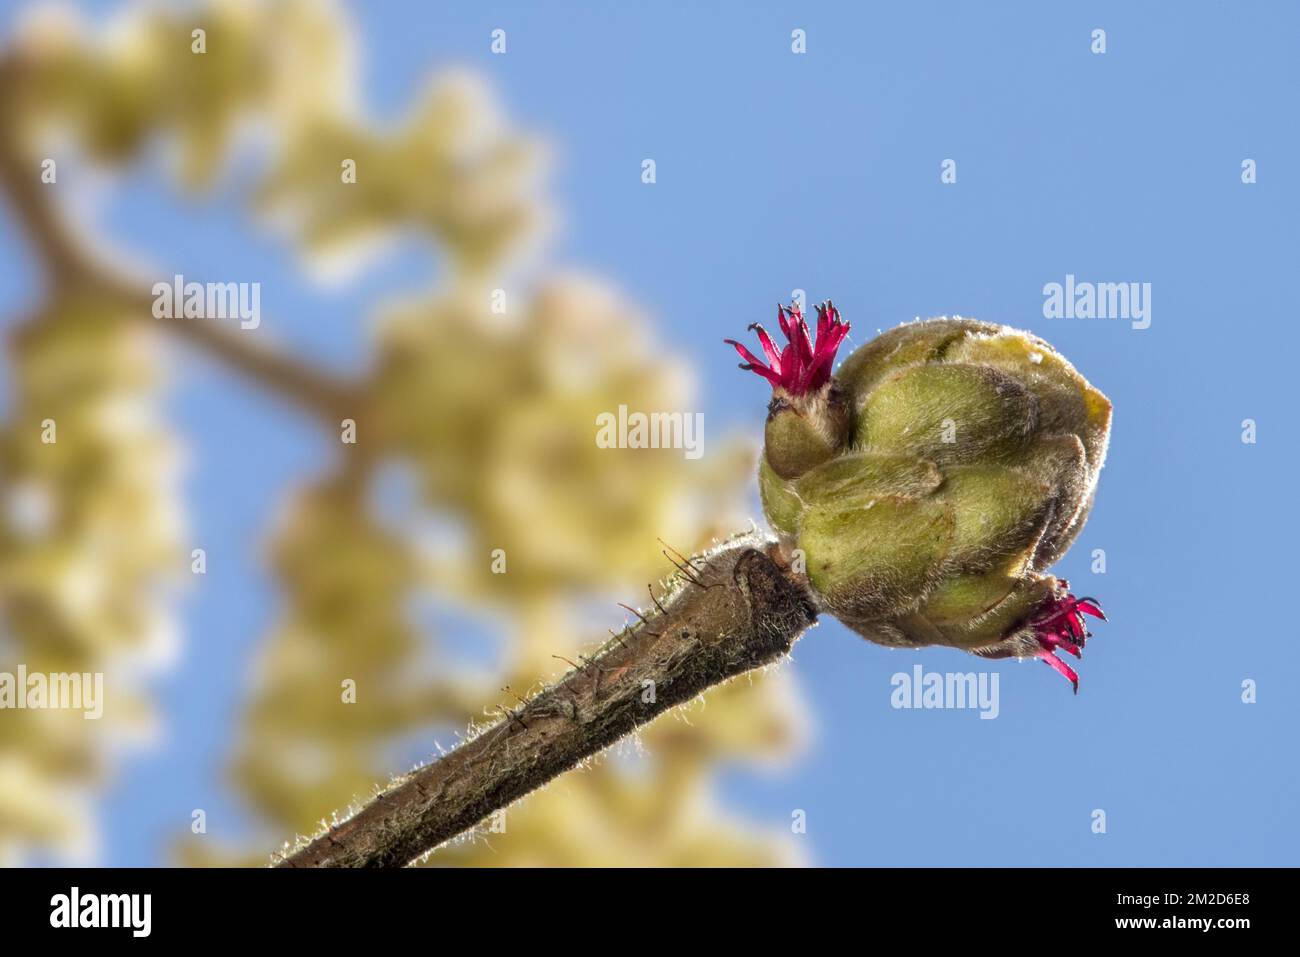 Common hazel (Corylus avellana) close up of female catkin concealed in bud with only the red styles visible against blue sky | Fleur femelle du noisetier / coudrier (Corylus avellana) montrant styles rouges dans son bourgeon écailleux contre ciel ble 16/02/2018 Stock Photo